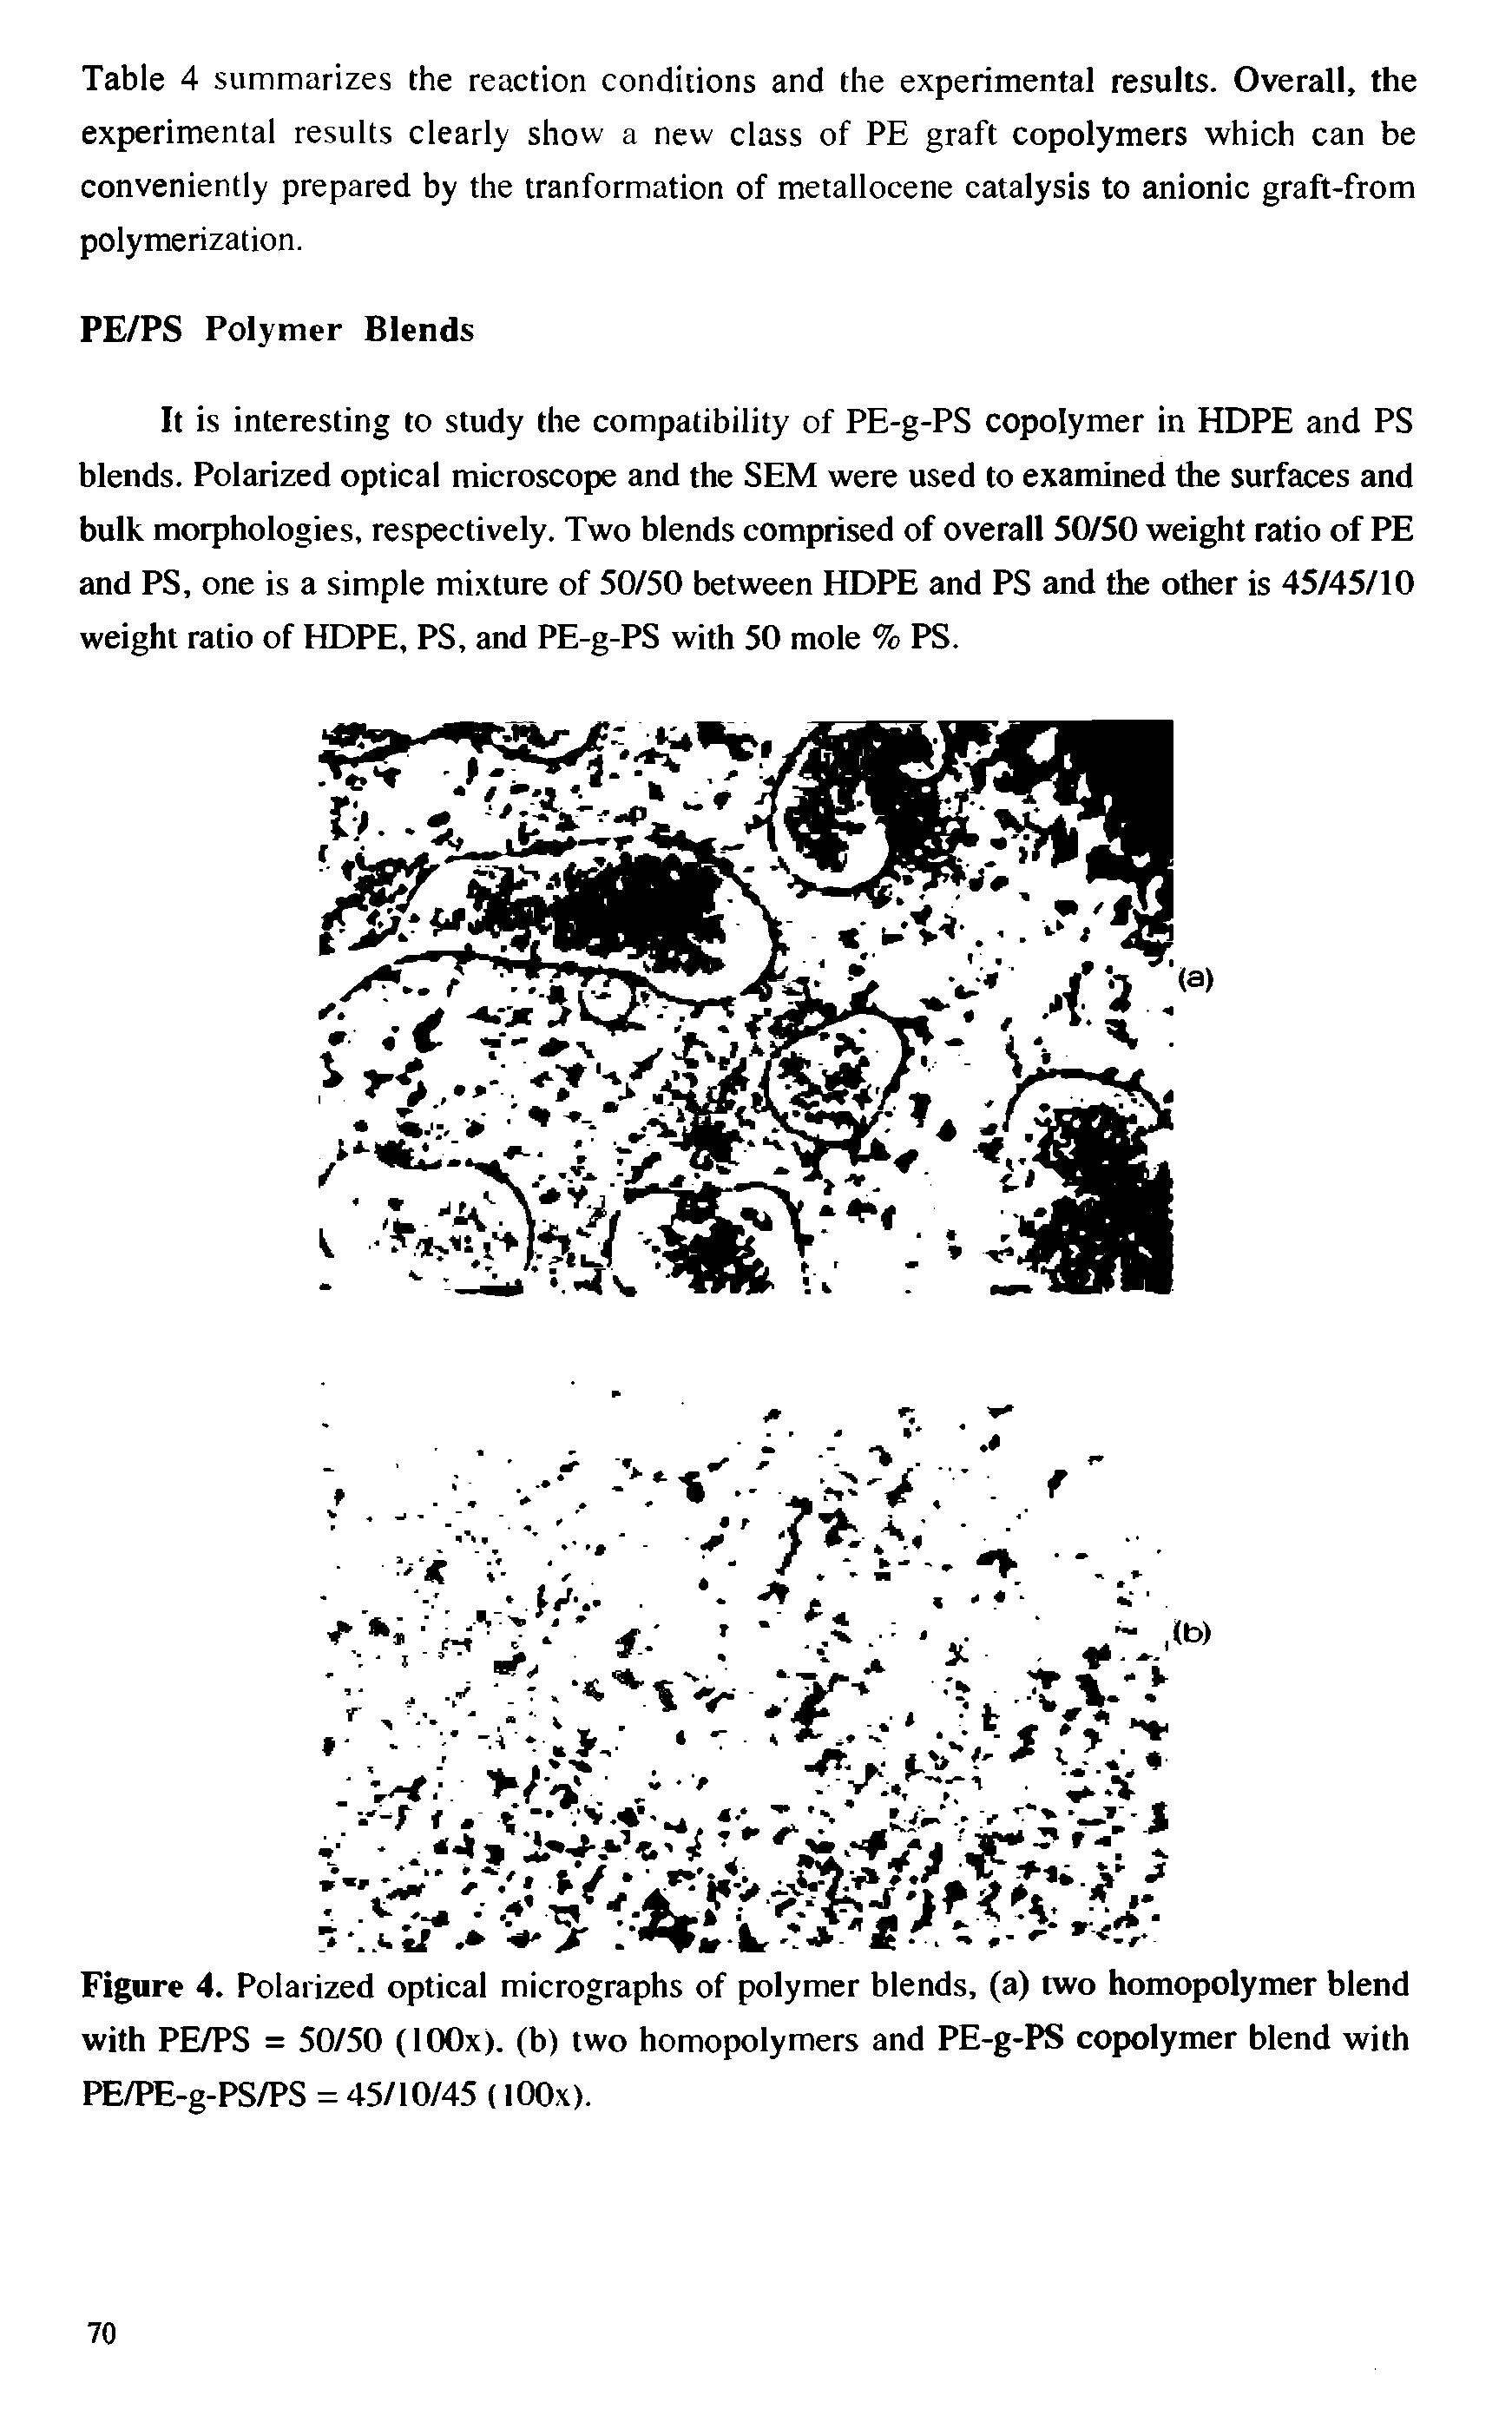 Figure 4. Polarized optical micrographs of polymer blends, (a) two homopolymer blend with PE/PS = 50/50 (100x). (b) two homopolymers and PE-g-PS copolymer blend with PE/PE-g-PS/PS = 45/10/45 (lOOx).